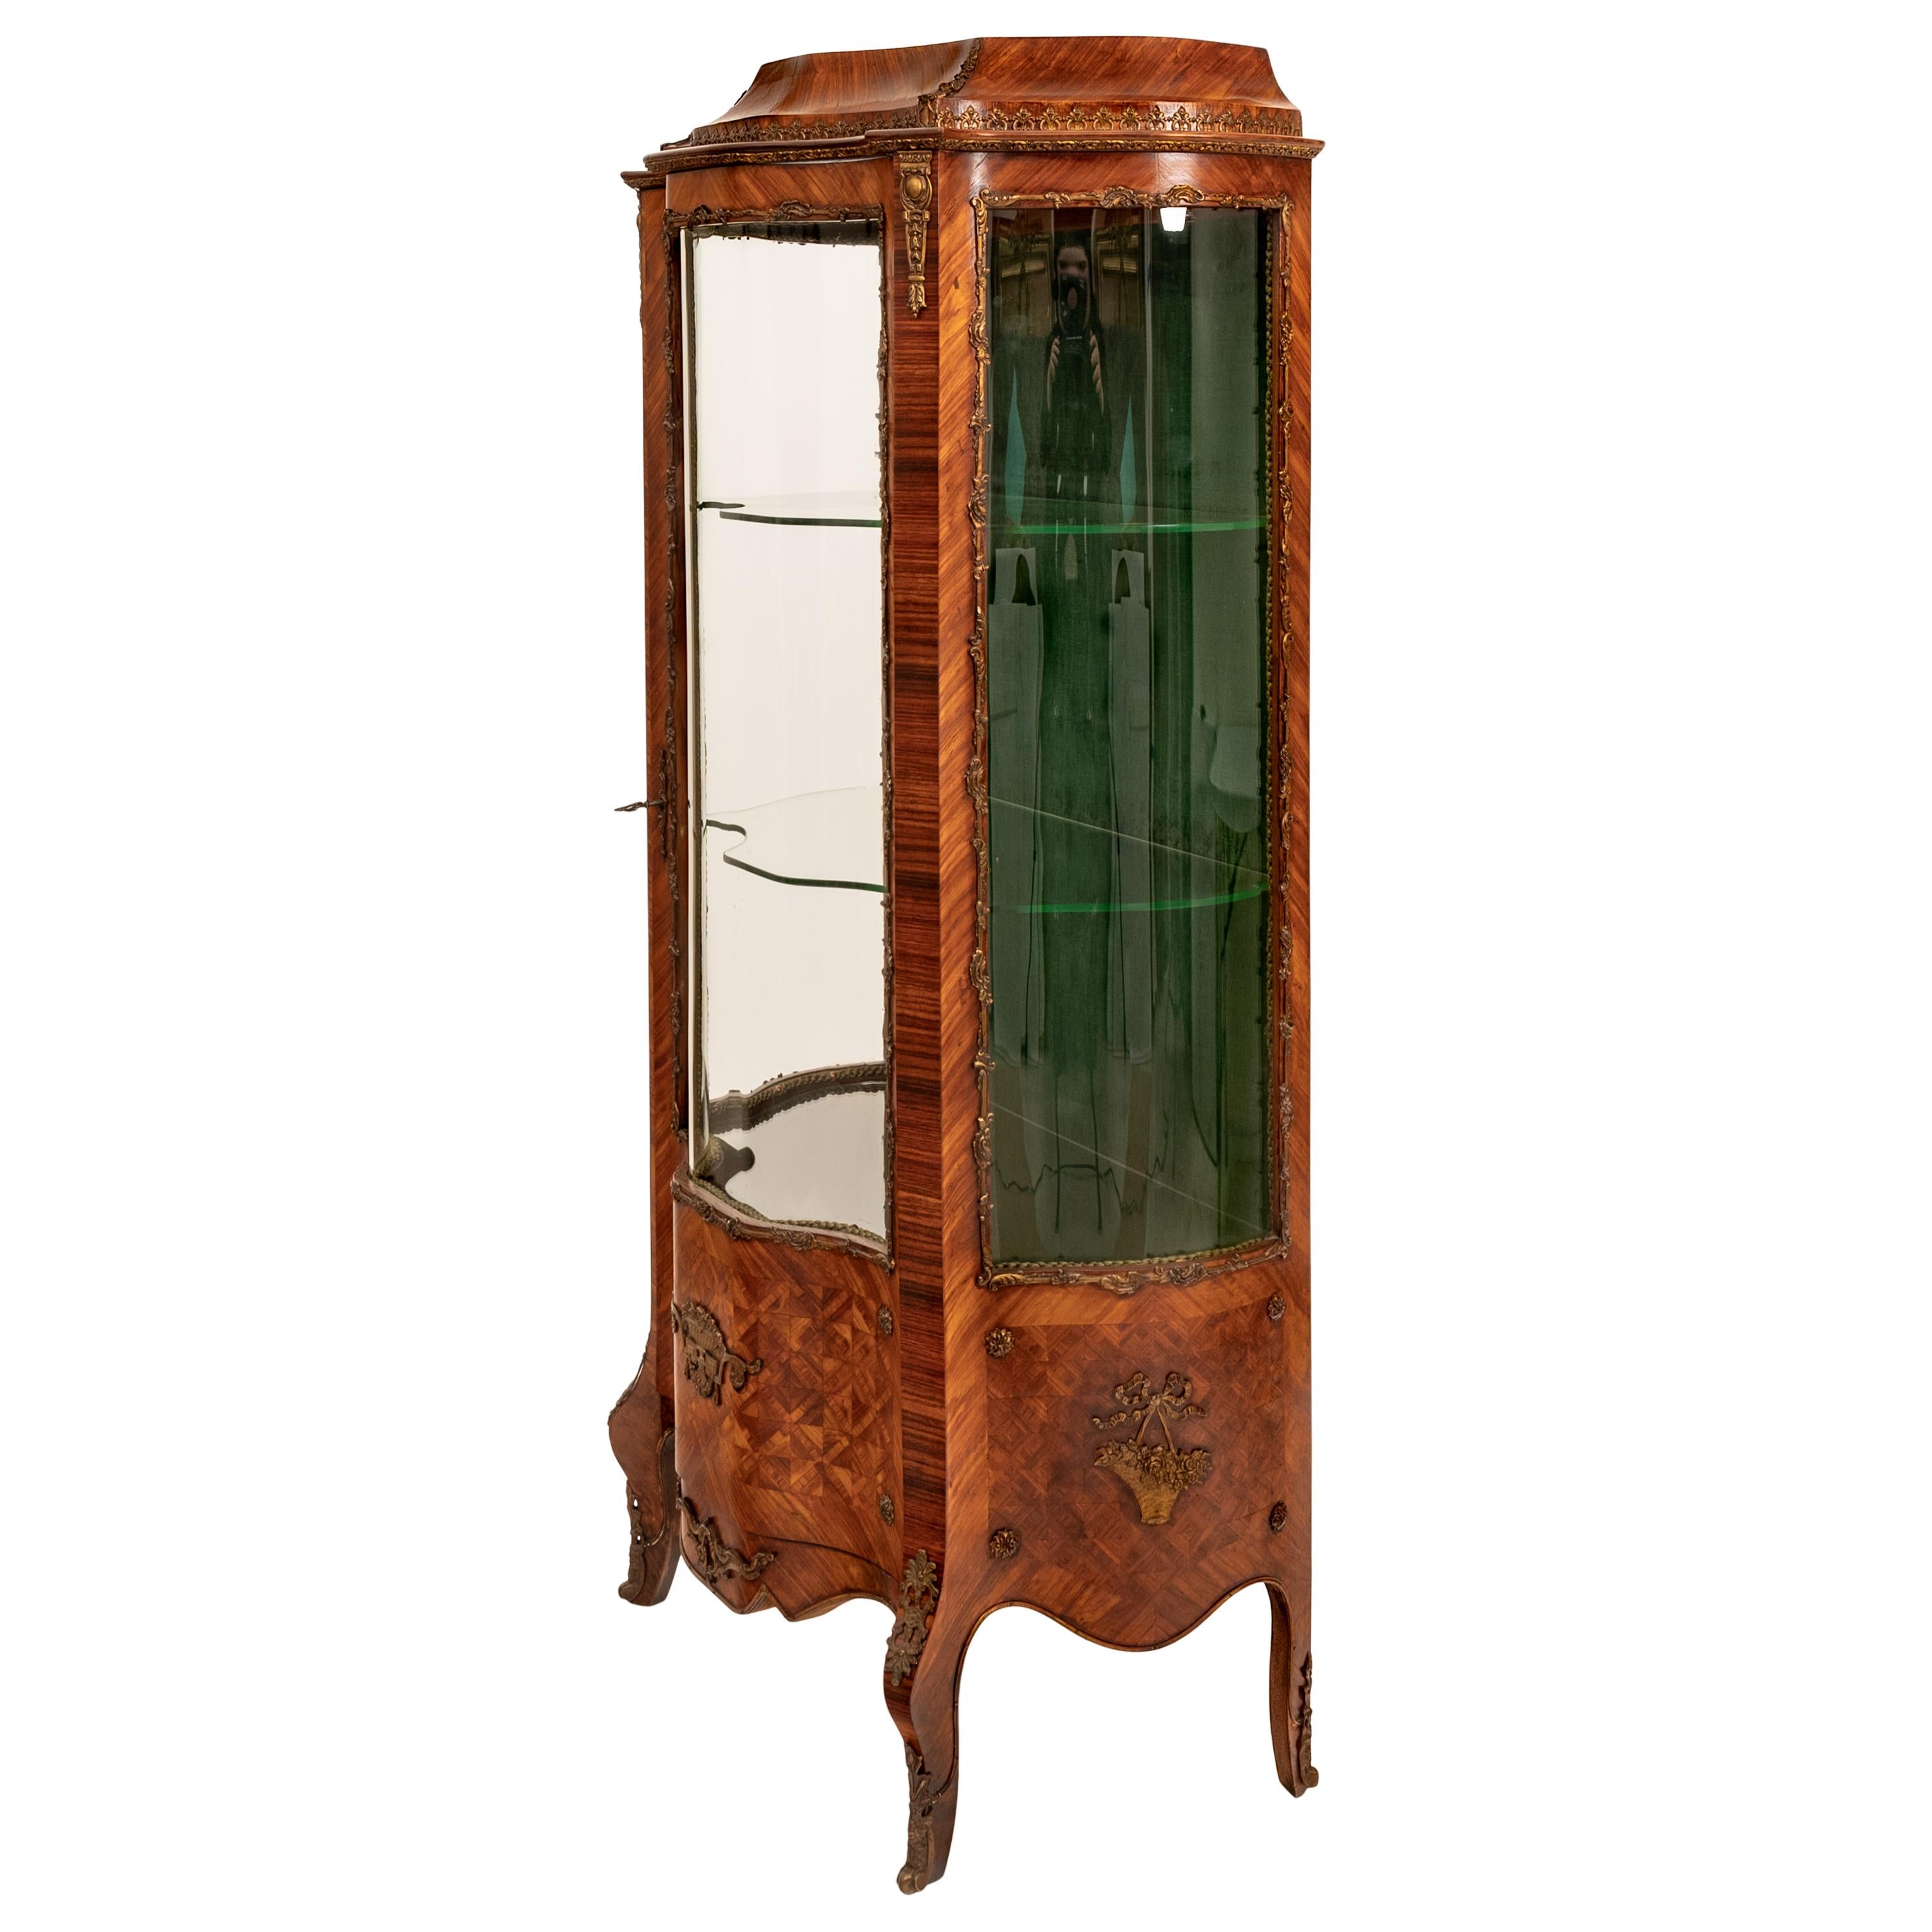 Fine Antique French Louis XV Kingwood Ormolu Bombe Shaped Marquetry Vitrine 1880 For Sale 1